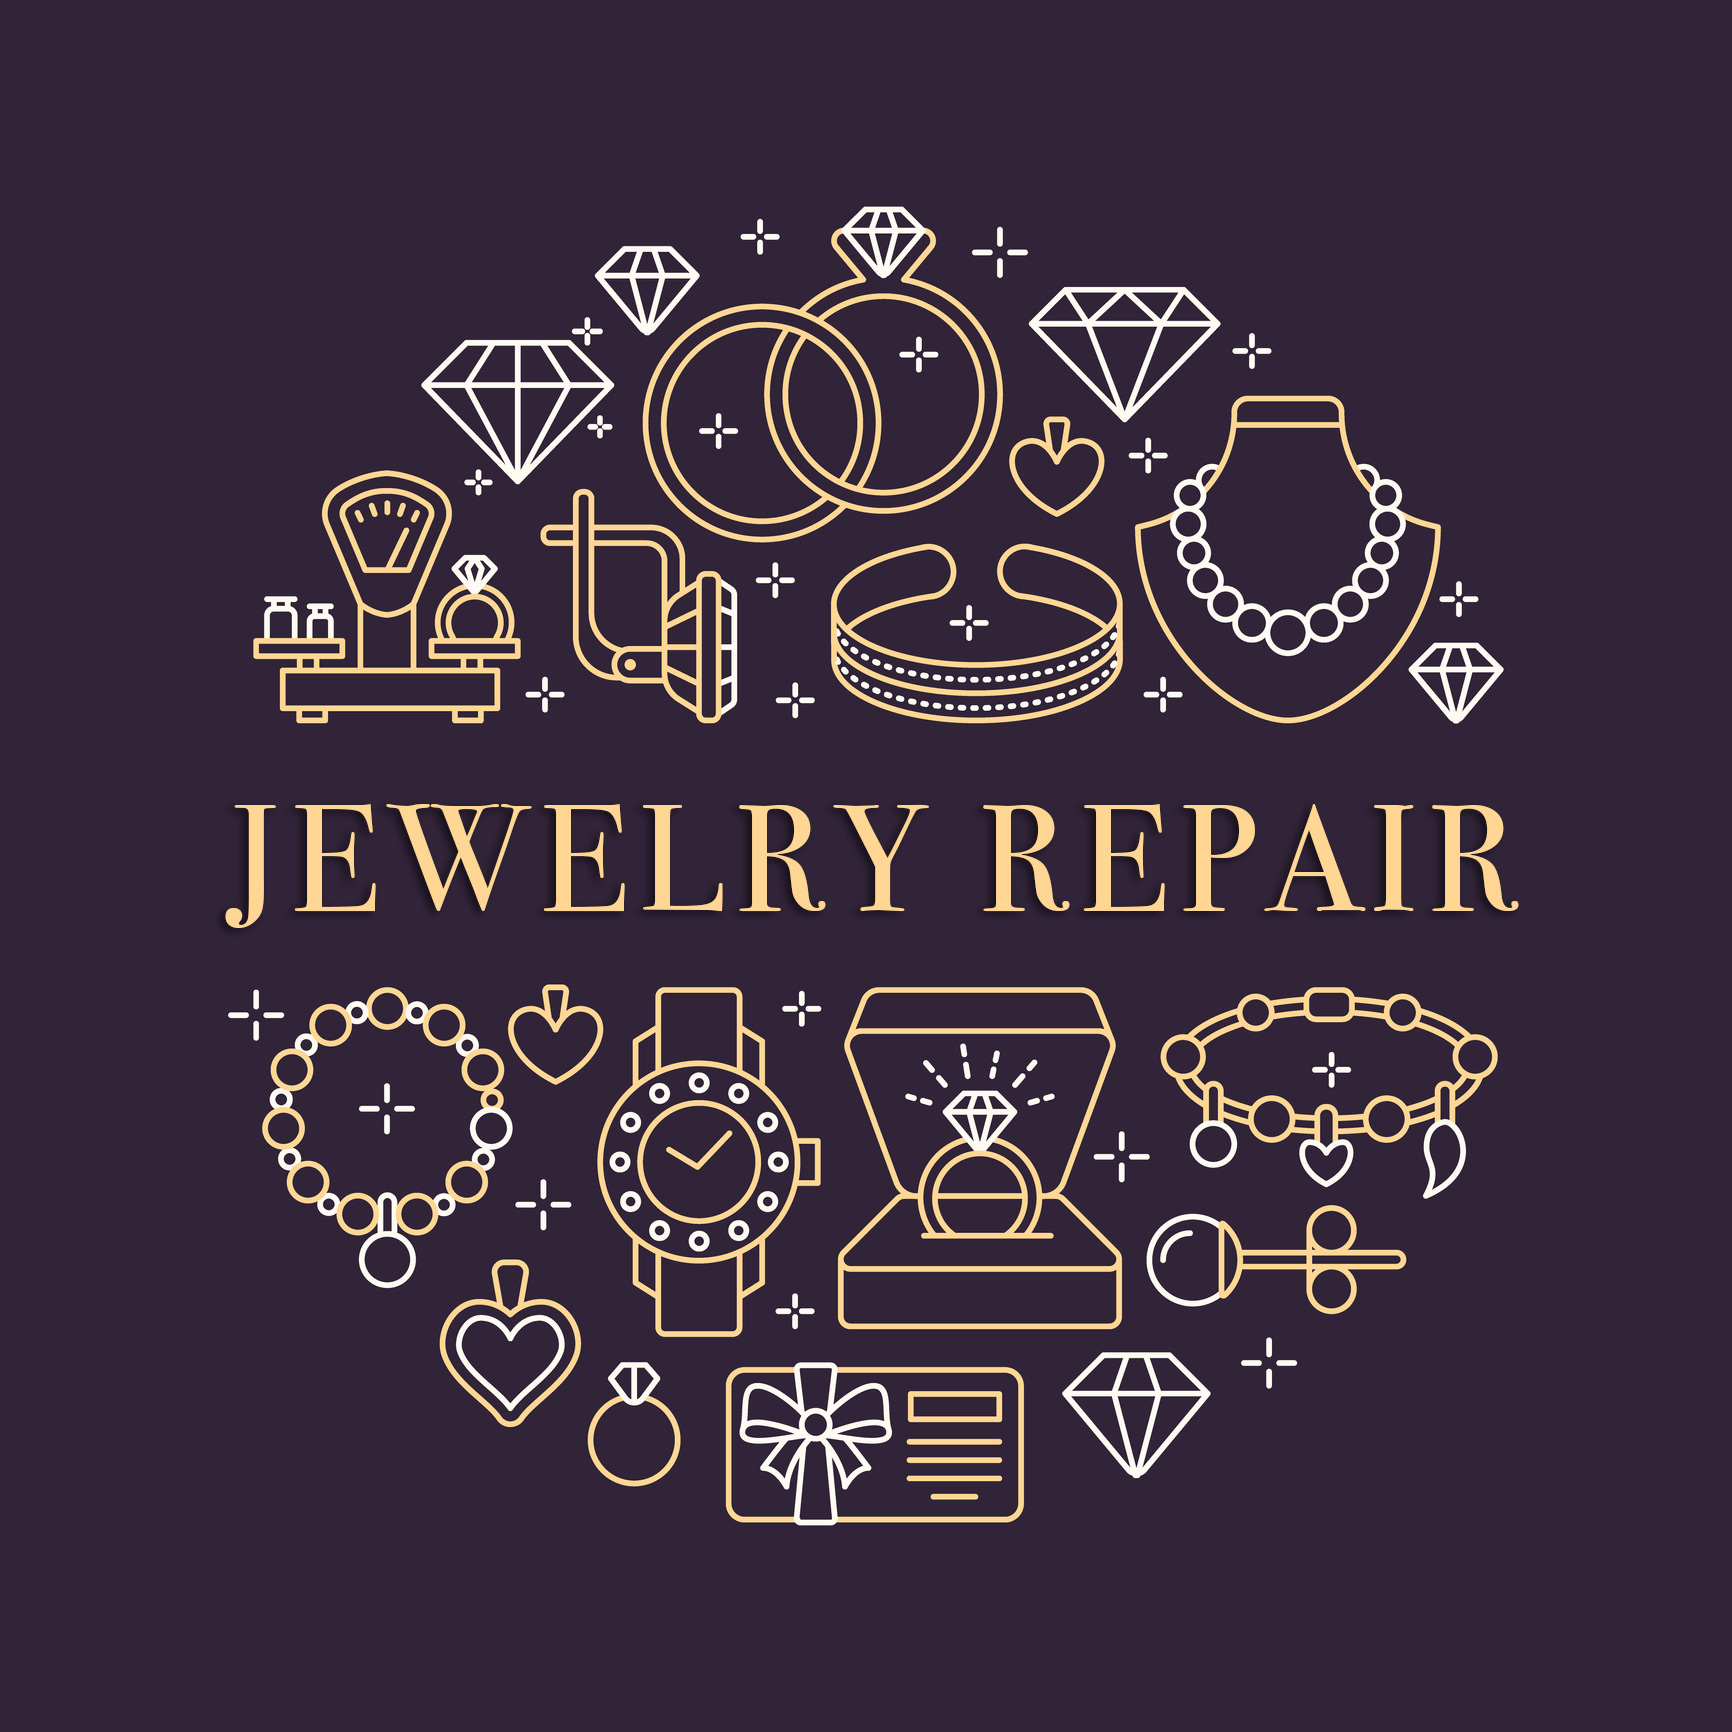 Jewelry Repair Services in CT